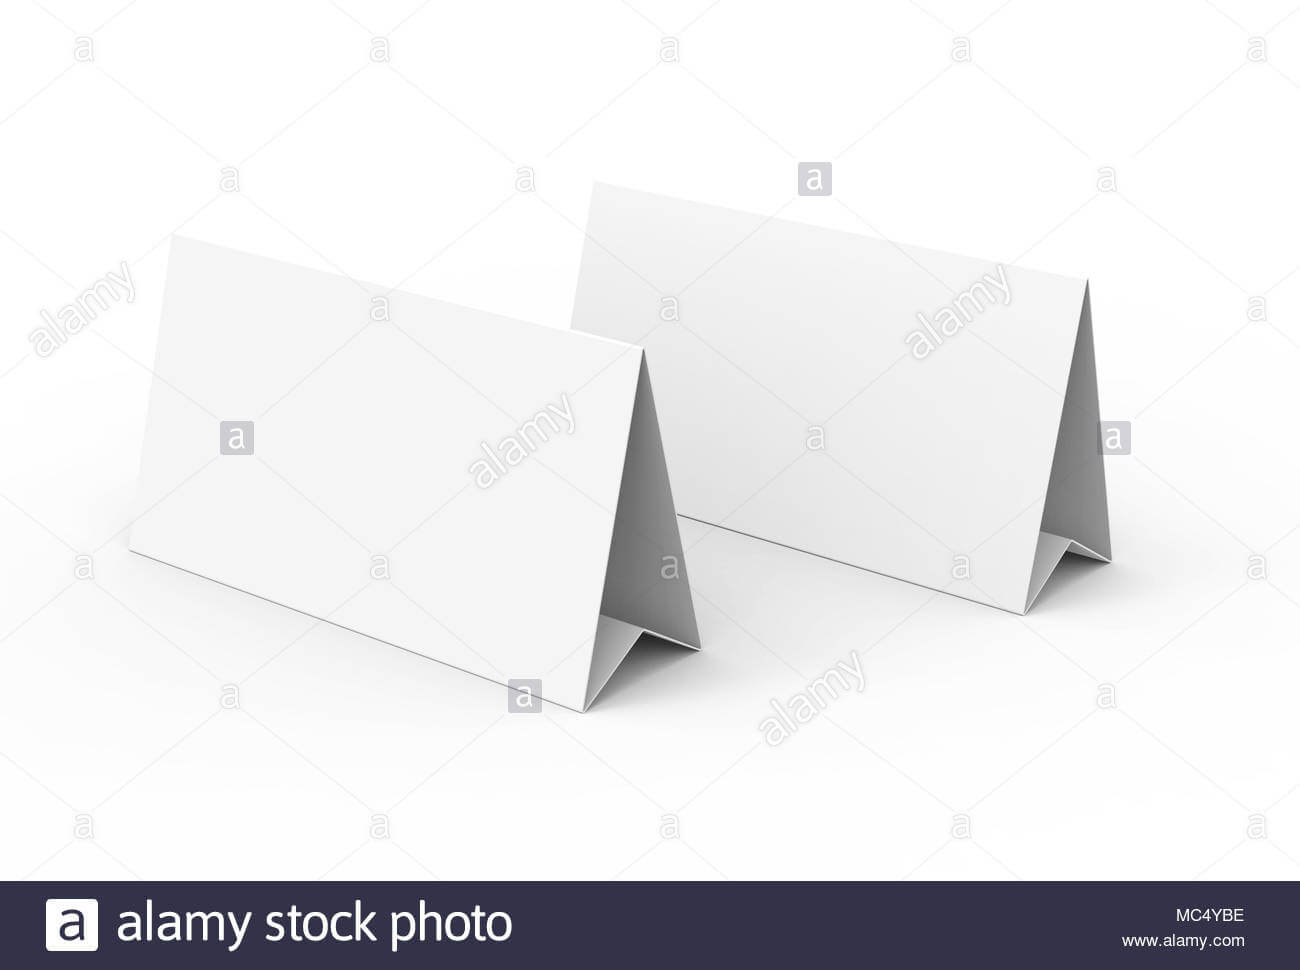 Blank Paper Tent Template, White Tent Cards Set With Empty With Blank Tent Card Template